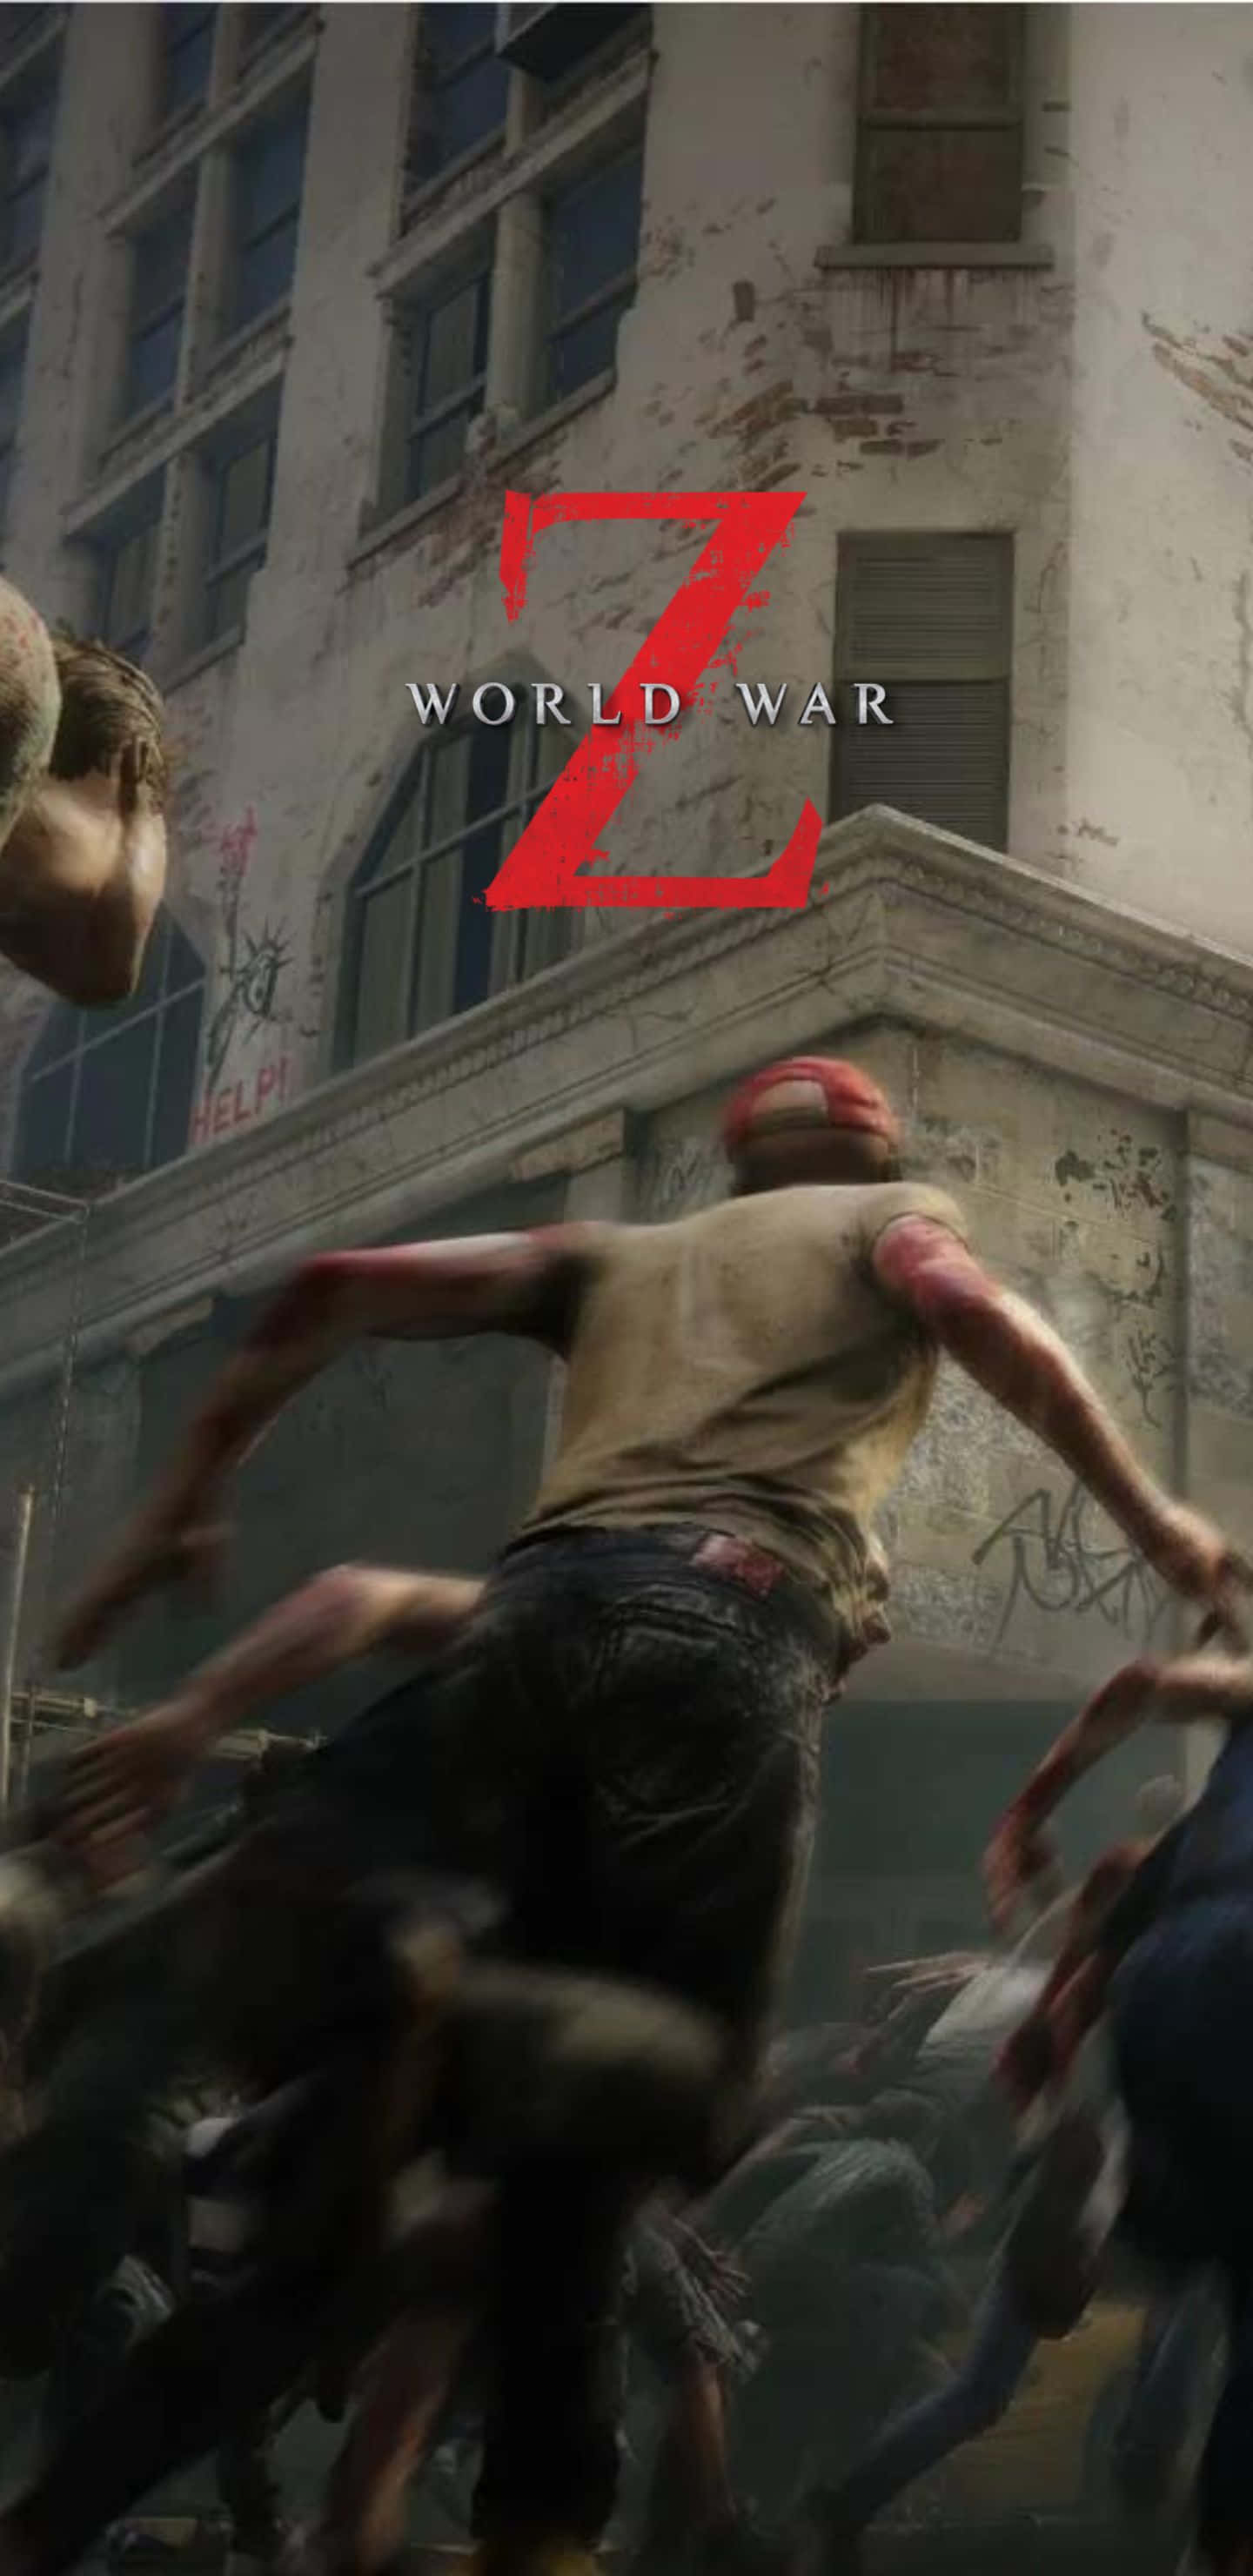 Pixel 3XL smartphone teamed up with World War Z to bring you the next level of entertainment.